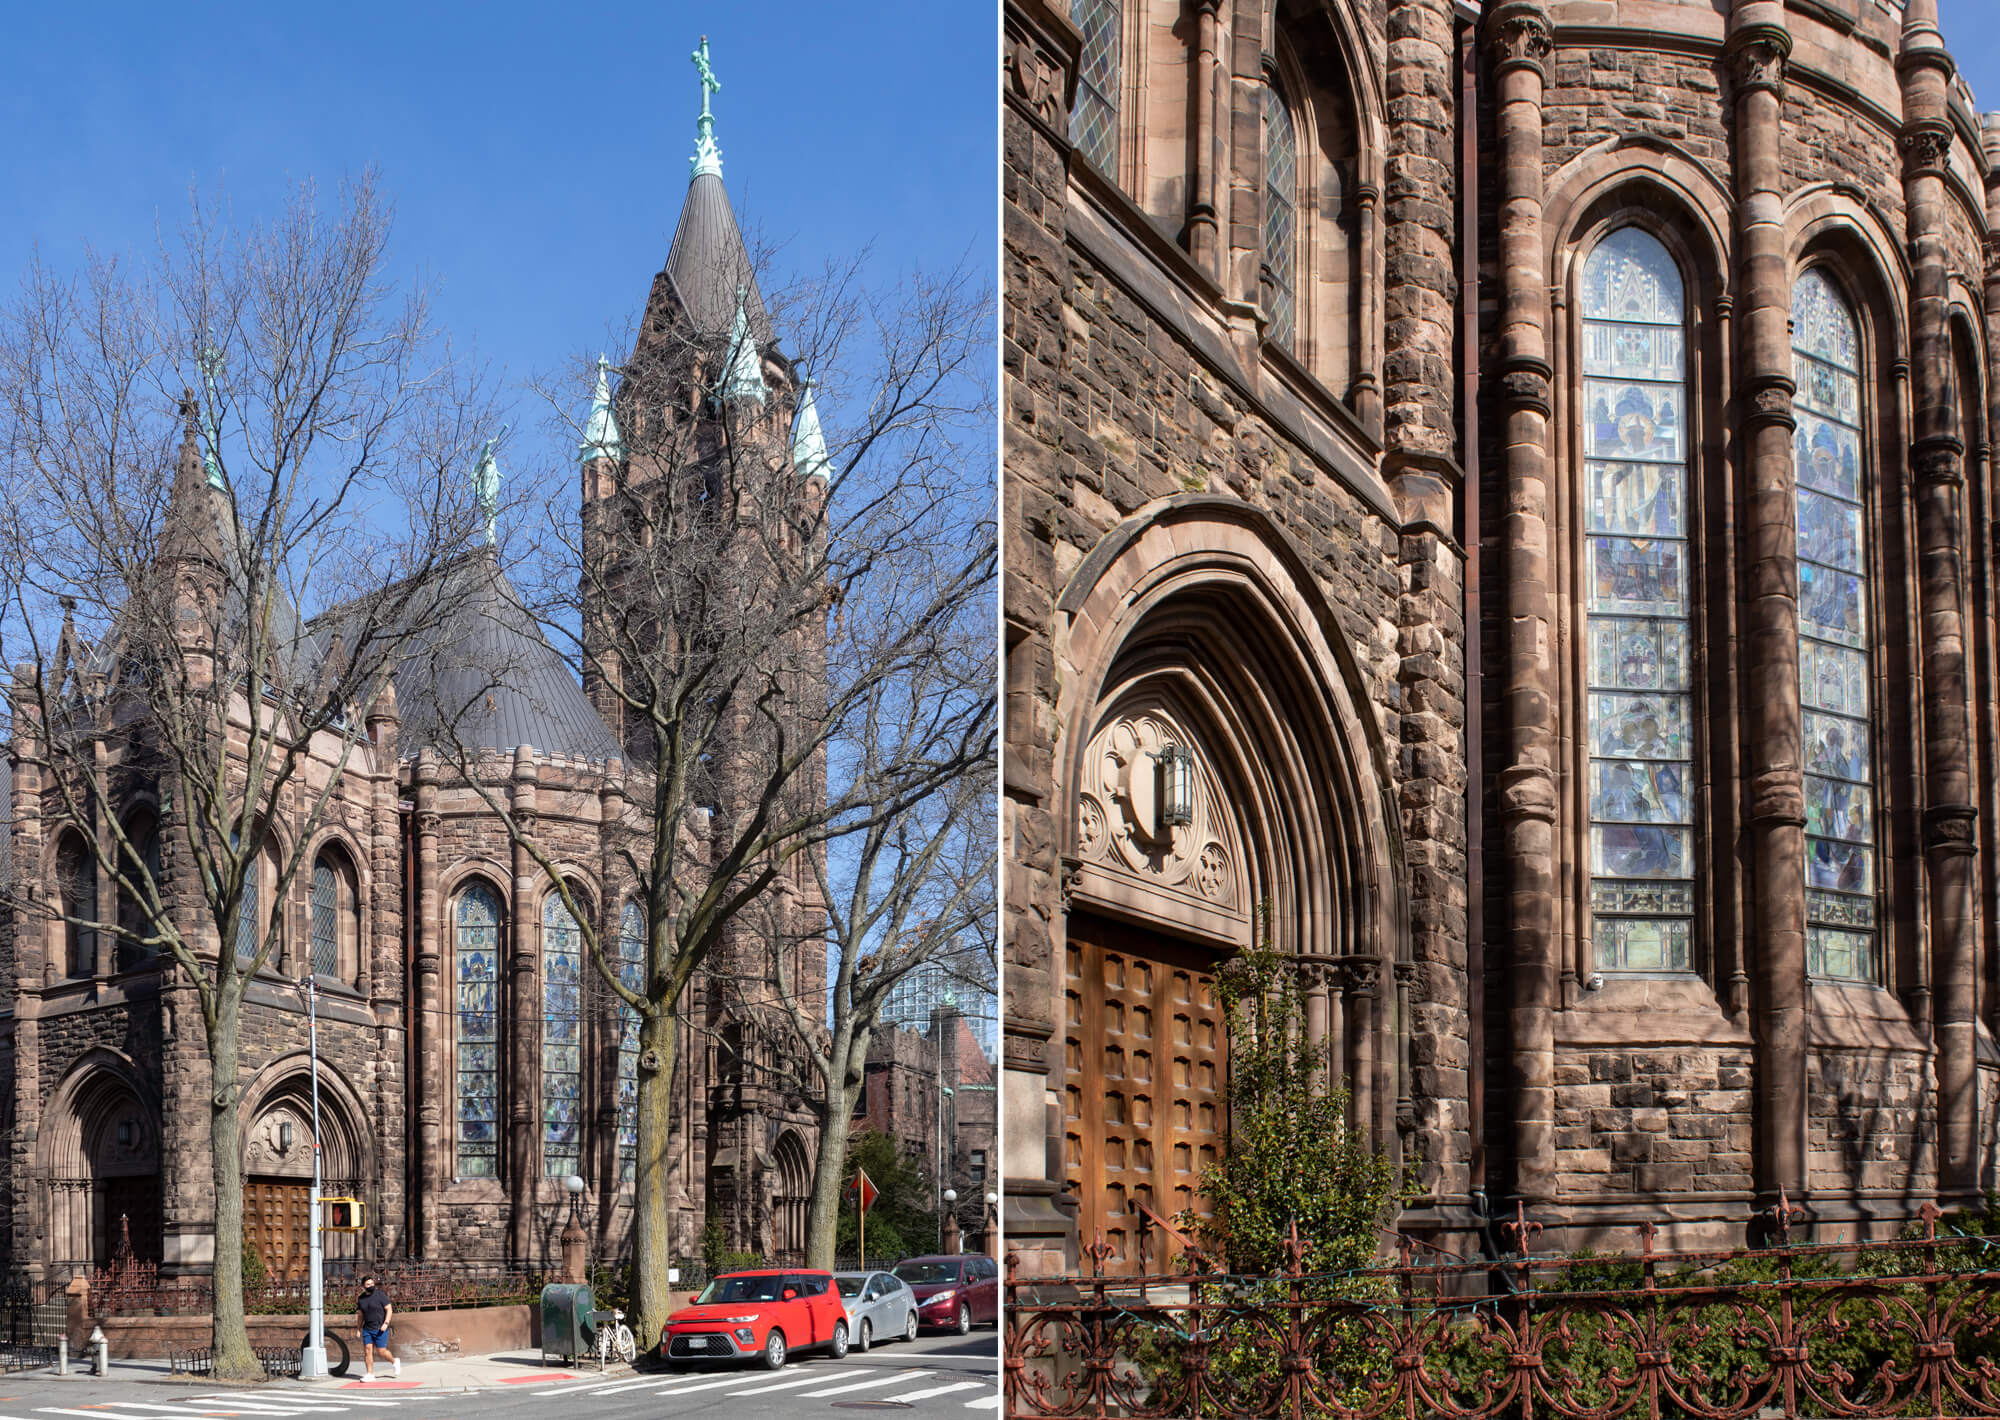  St. Augustine Roman Catholic Church on 6th Avenue in Park Slope